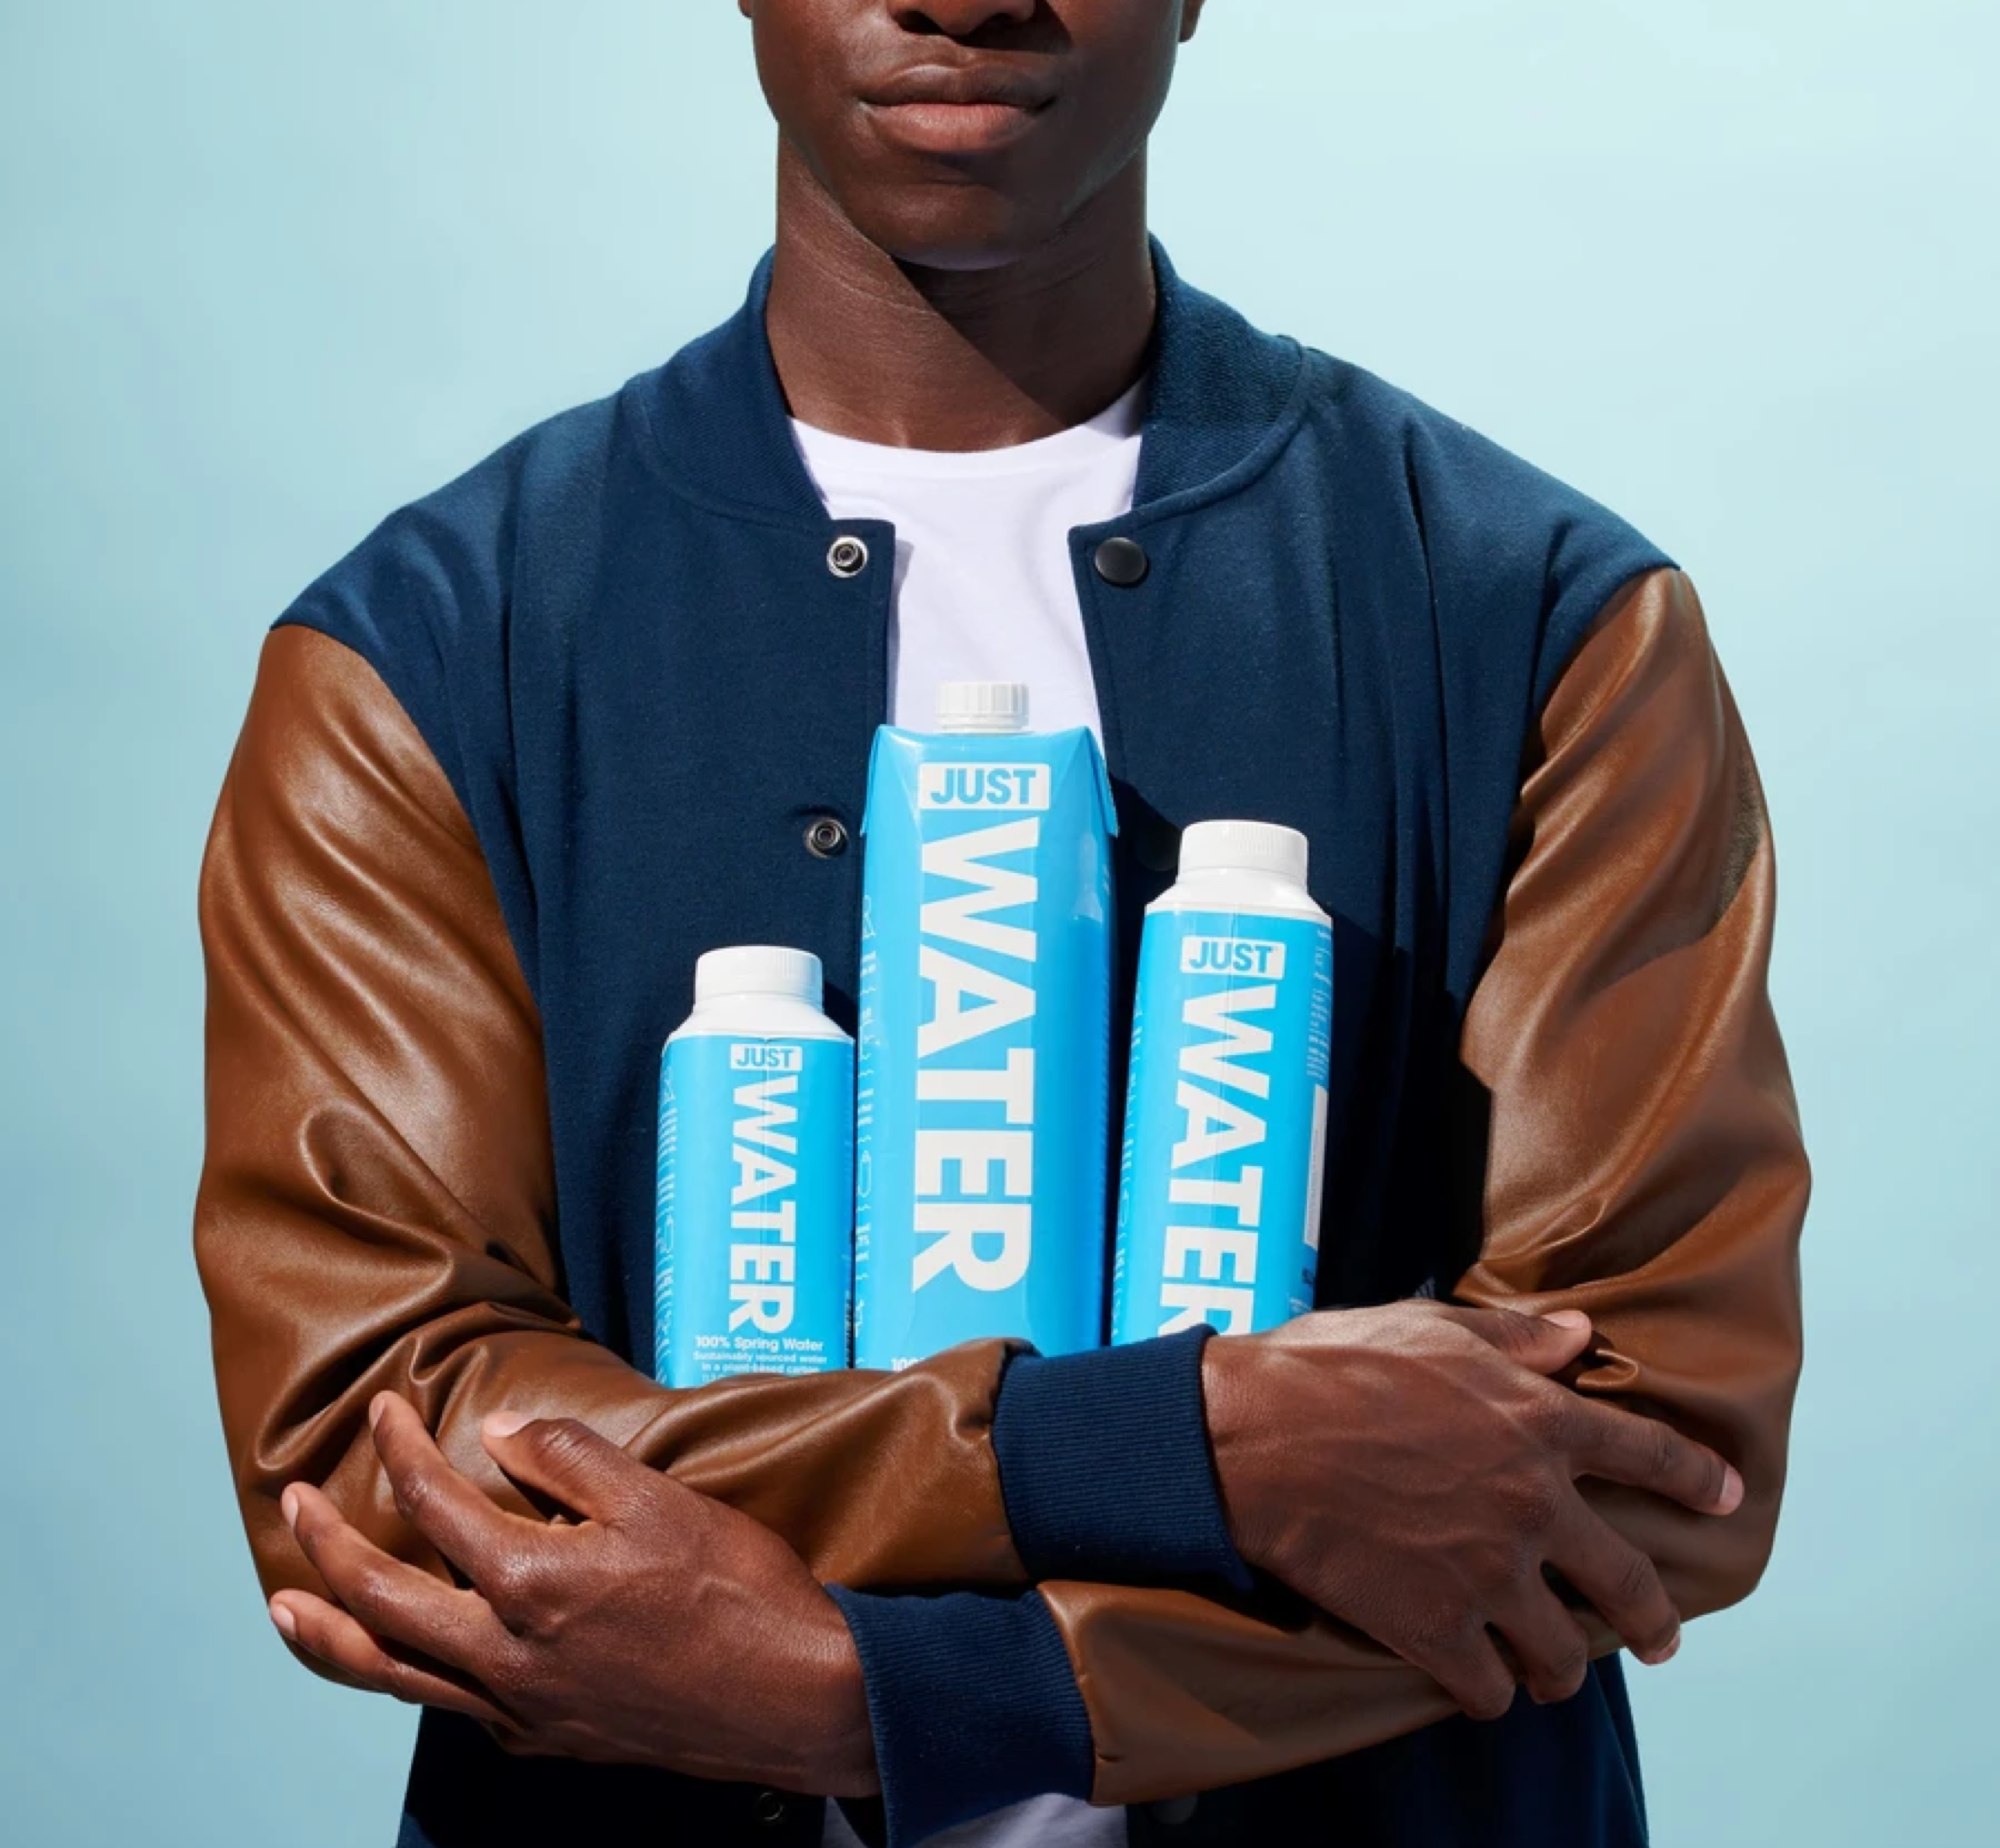 JUST Water coupons, MEN HOLDING THREE CARTON OF JUST WATER